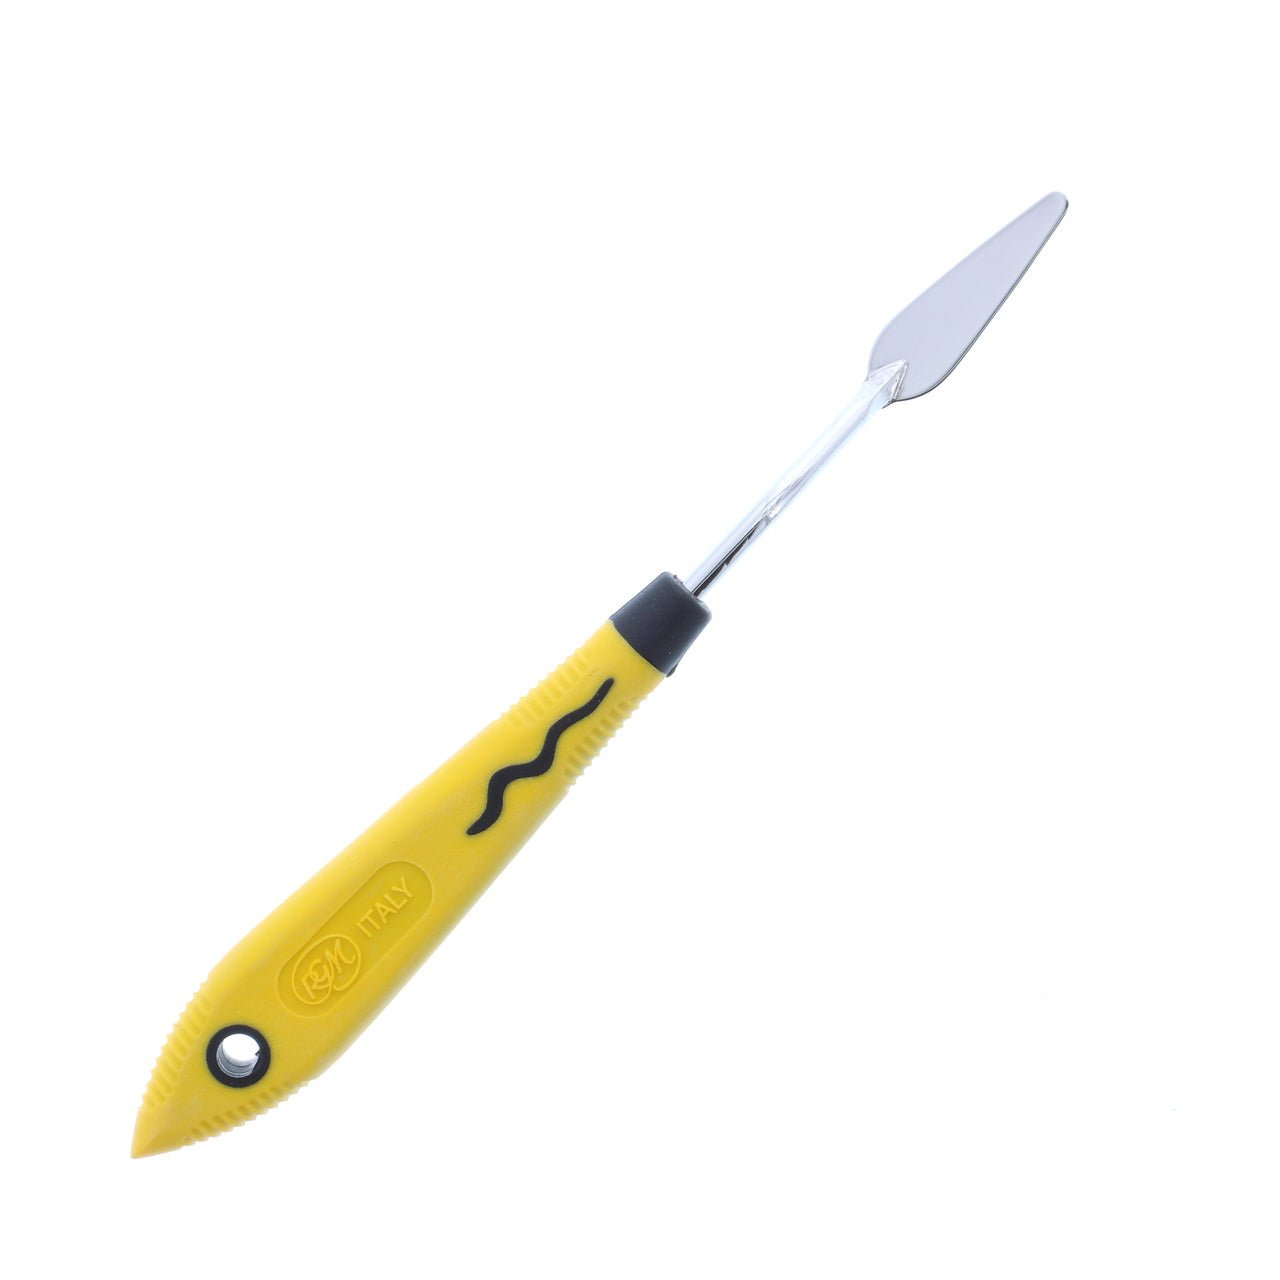 RGM Soft Grip Painting Knife #002 (Yellow Handle)